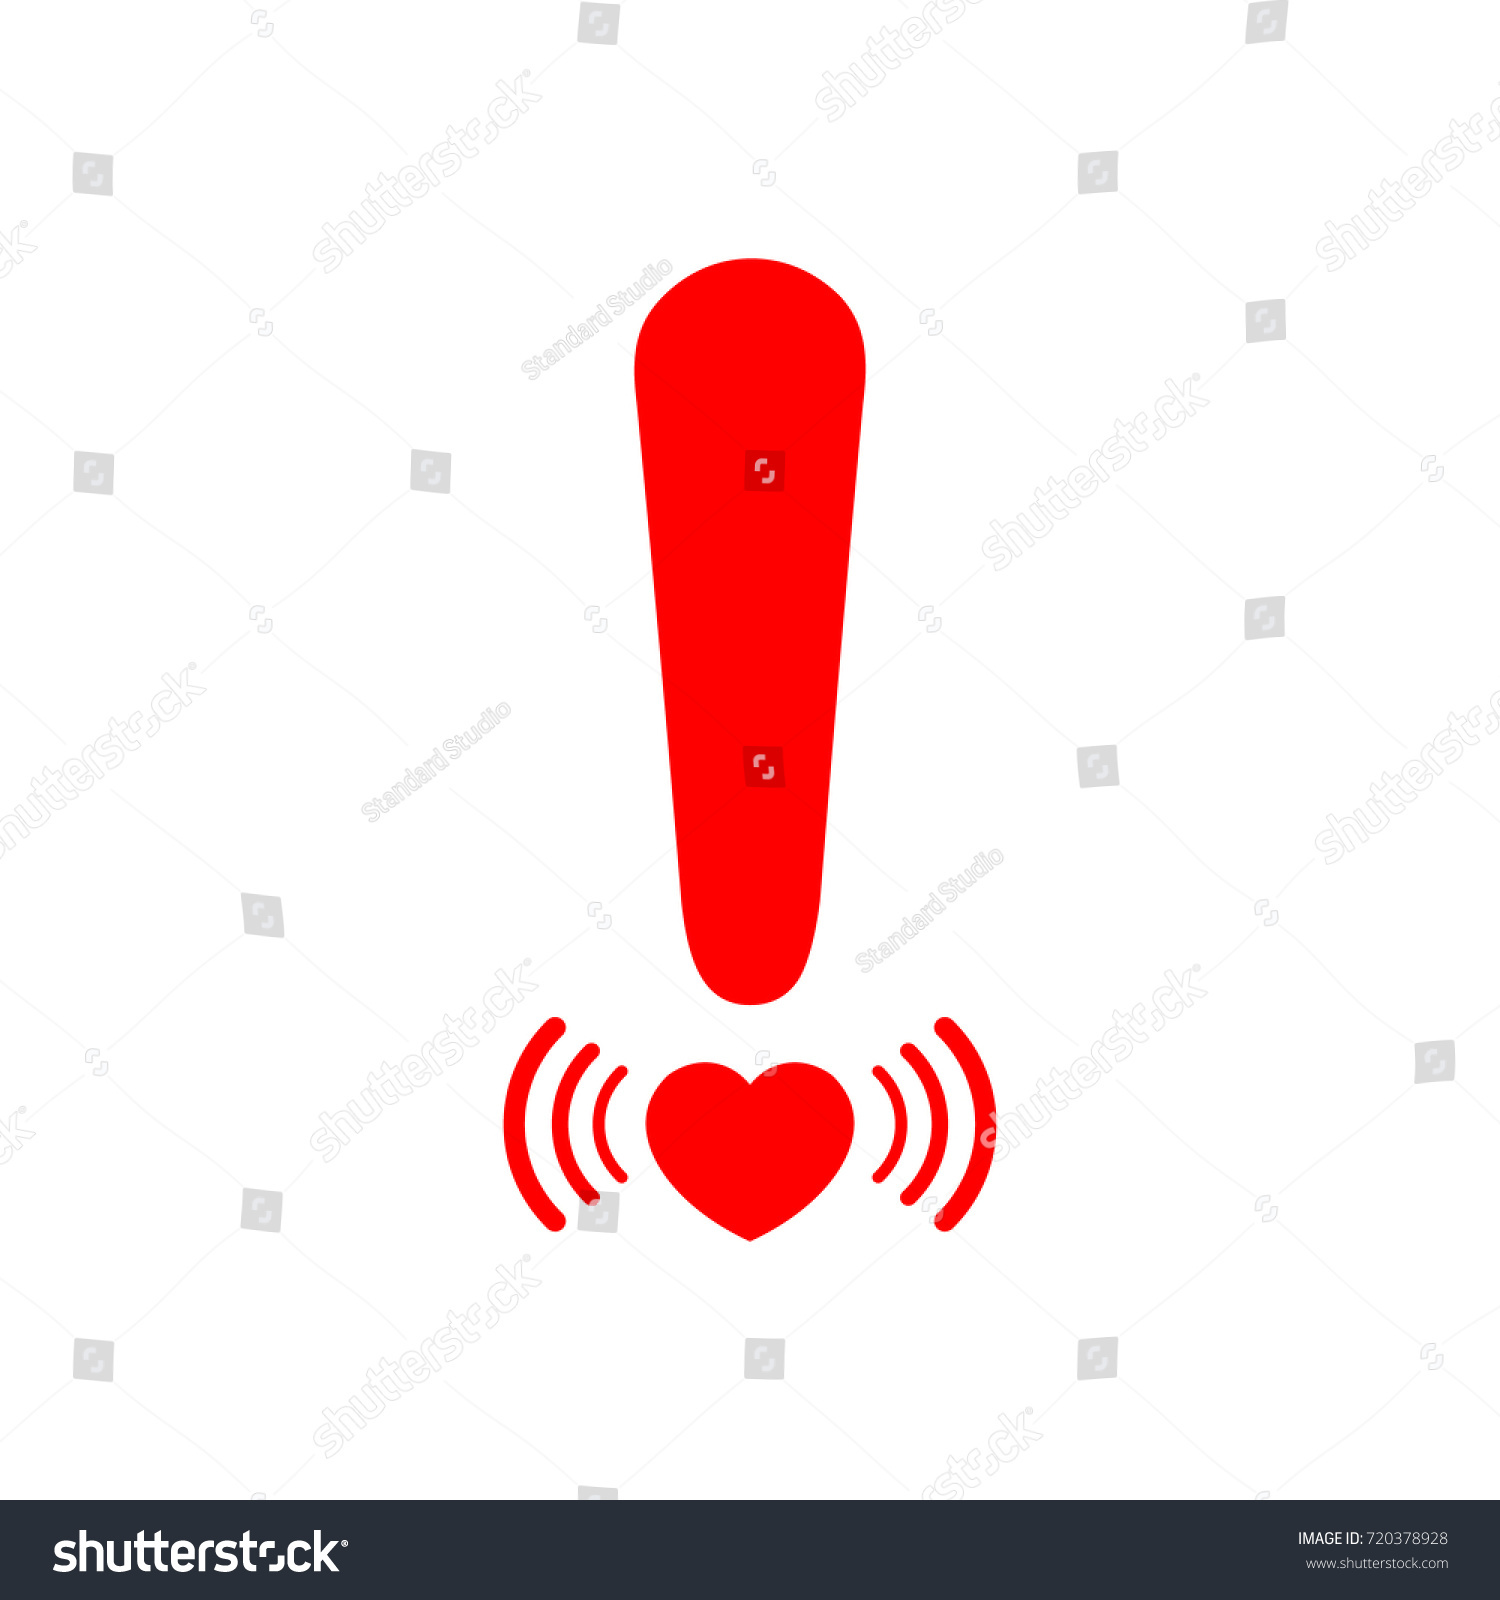 Red circle exclamation mark icon warning sign. Use it in all 